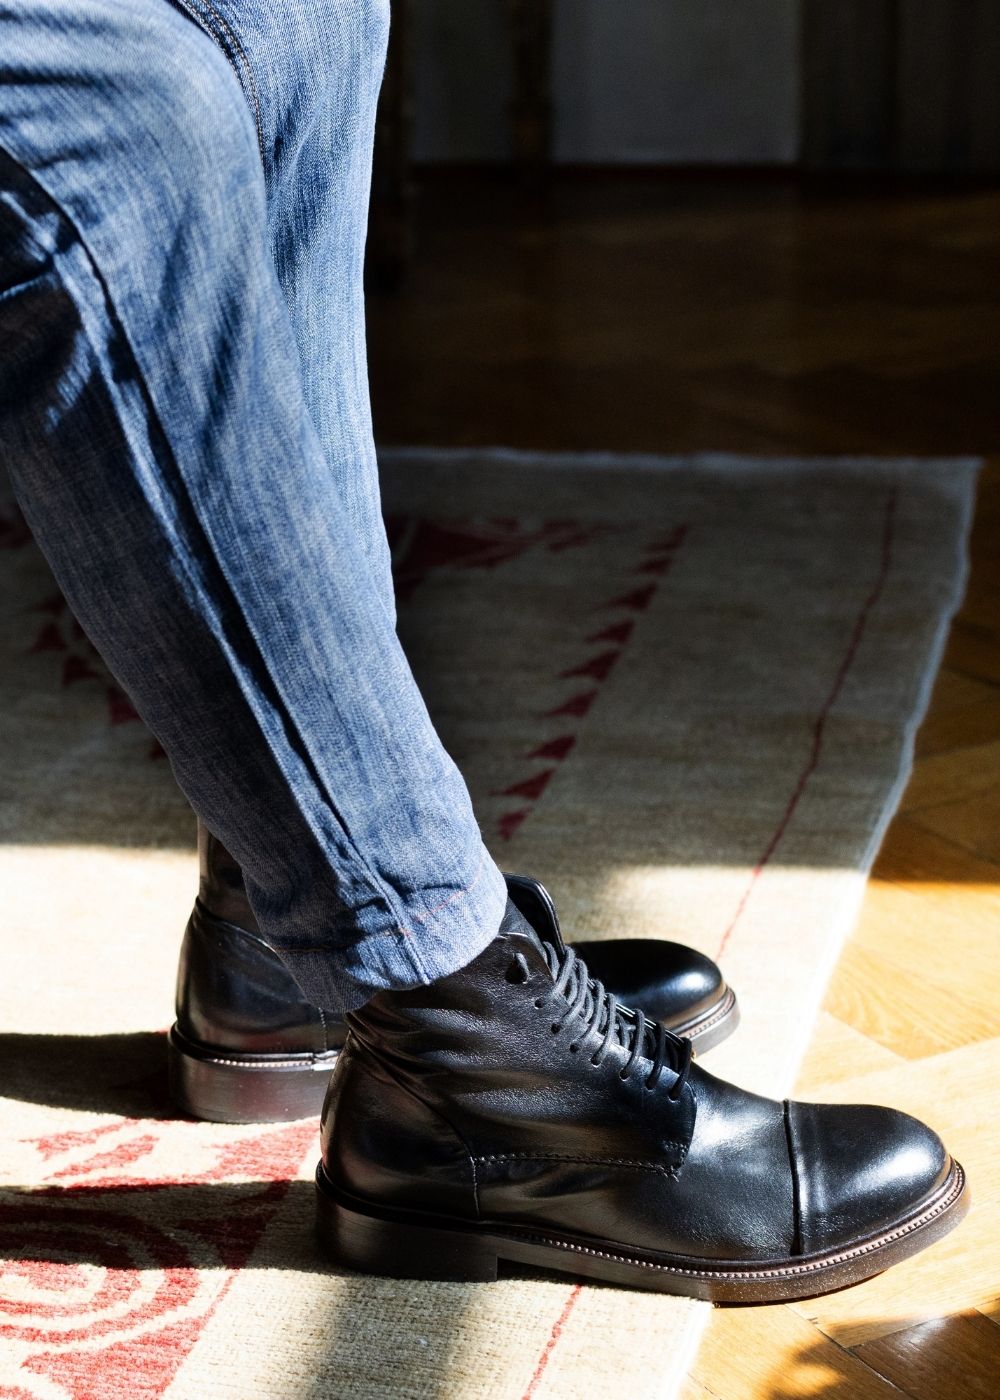 Lace-ups and Buckles Shoes - Men